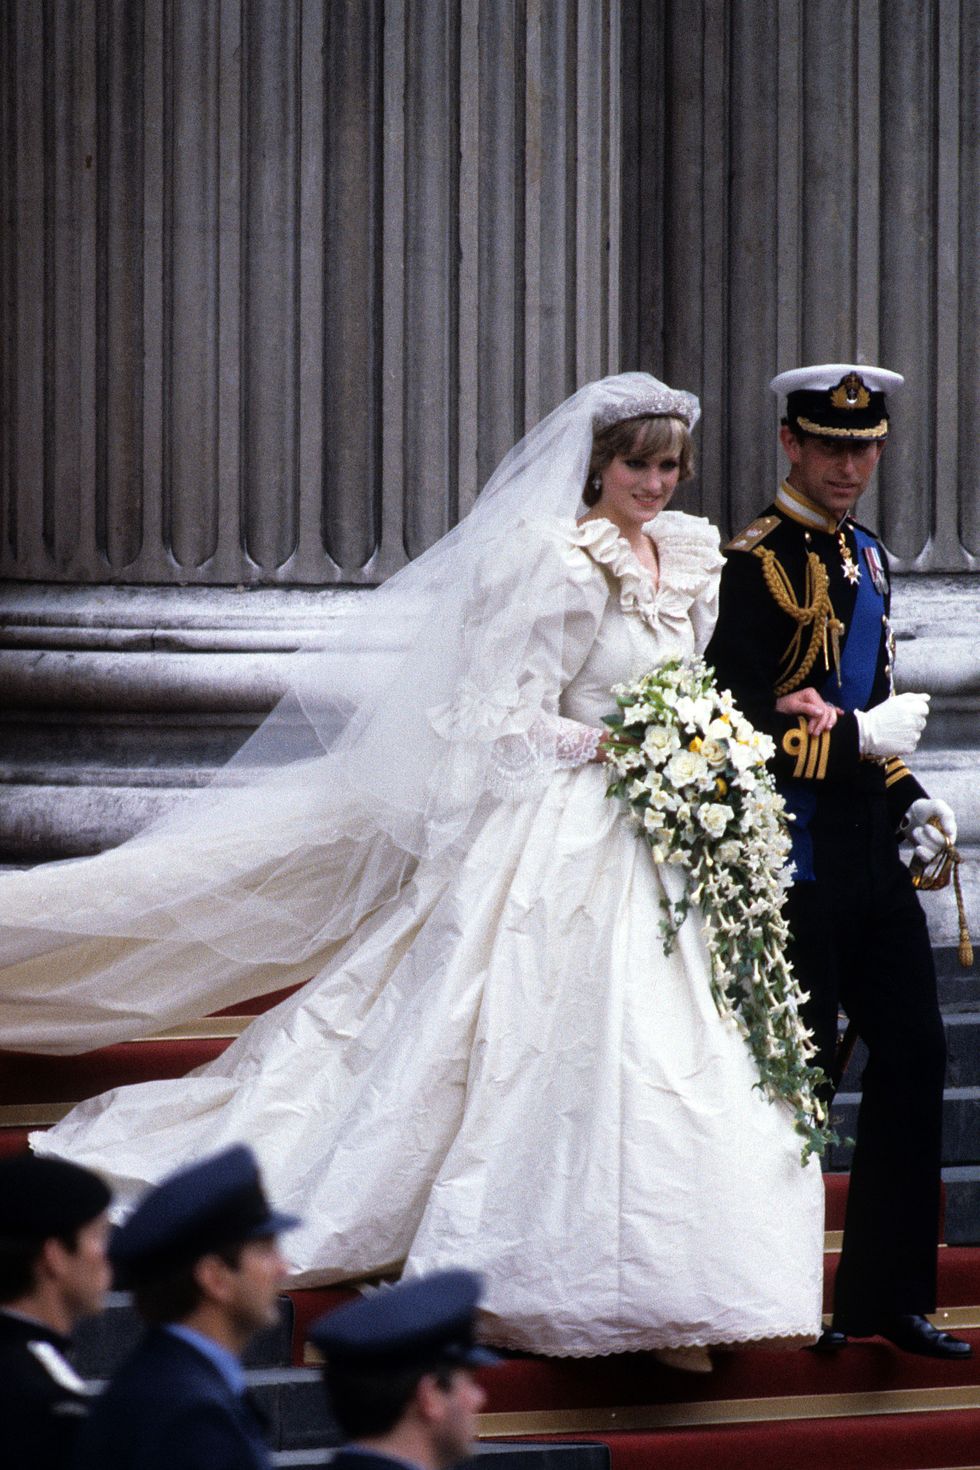 <p>Diana's wedding gown, in all its 1980s glory, was instantly iconic after her nuptials aired to an estimated TV audience of 750 million.&nbsp;</p><p><strong data-redactor-tag="strong" data-verified="redactor">RELATED: </strong><a href="http://www.redbookmag.com/love-sex/relationships/news/g4459/princess-diana-prince-charles-rare-wedding-photos/" target="_blank" data-tracking-id="recirc-text-link"><strong data-redactor-tag="strong" data-verified="redactor">Rare Photos From Princess Diana and Prince Charles' Wedding Released</strong></a></p>